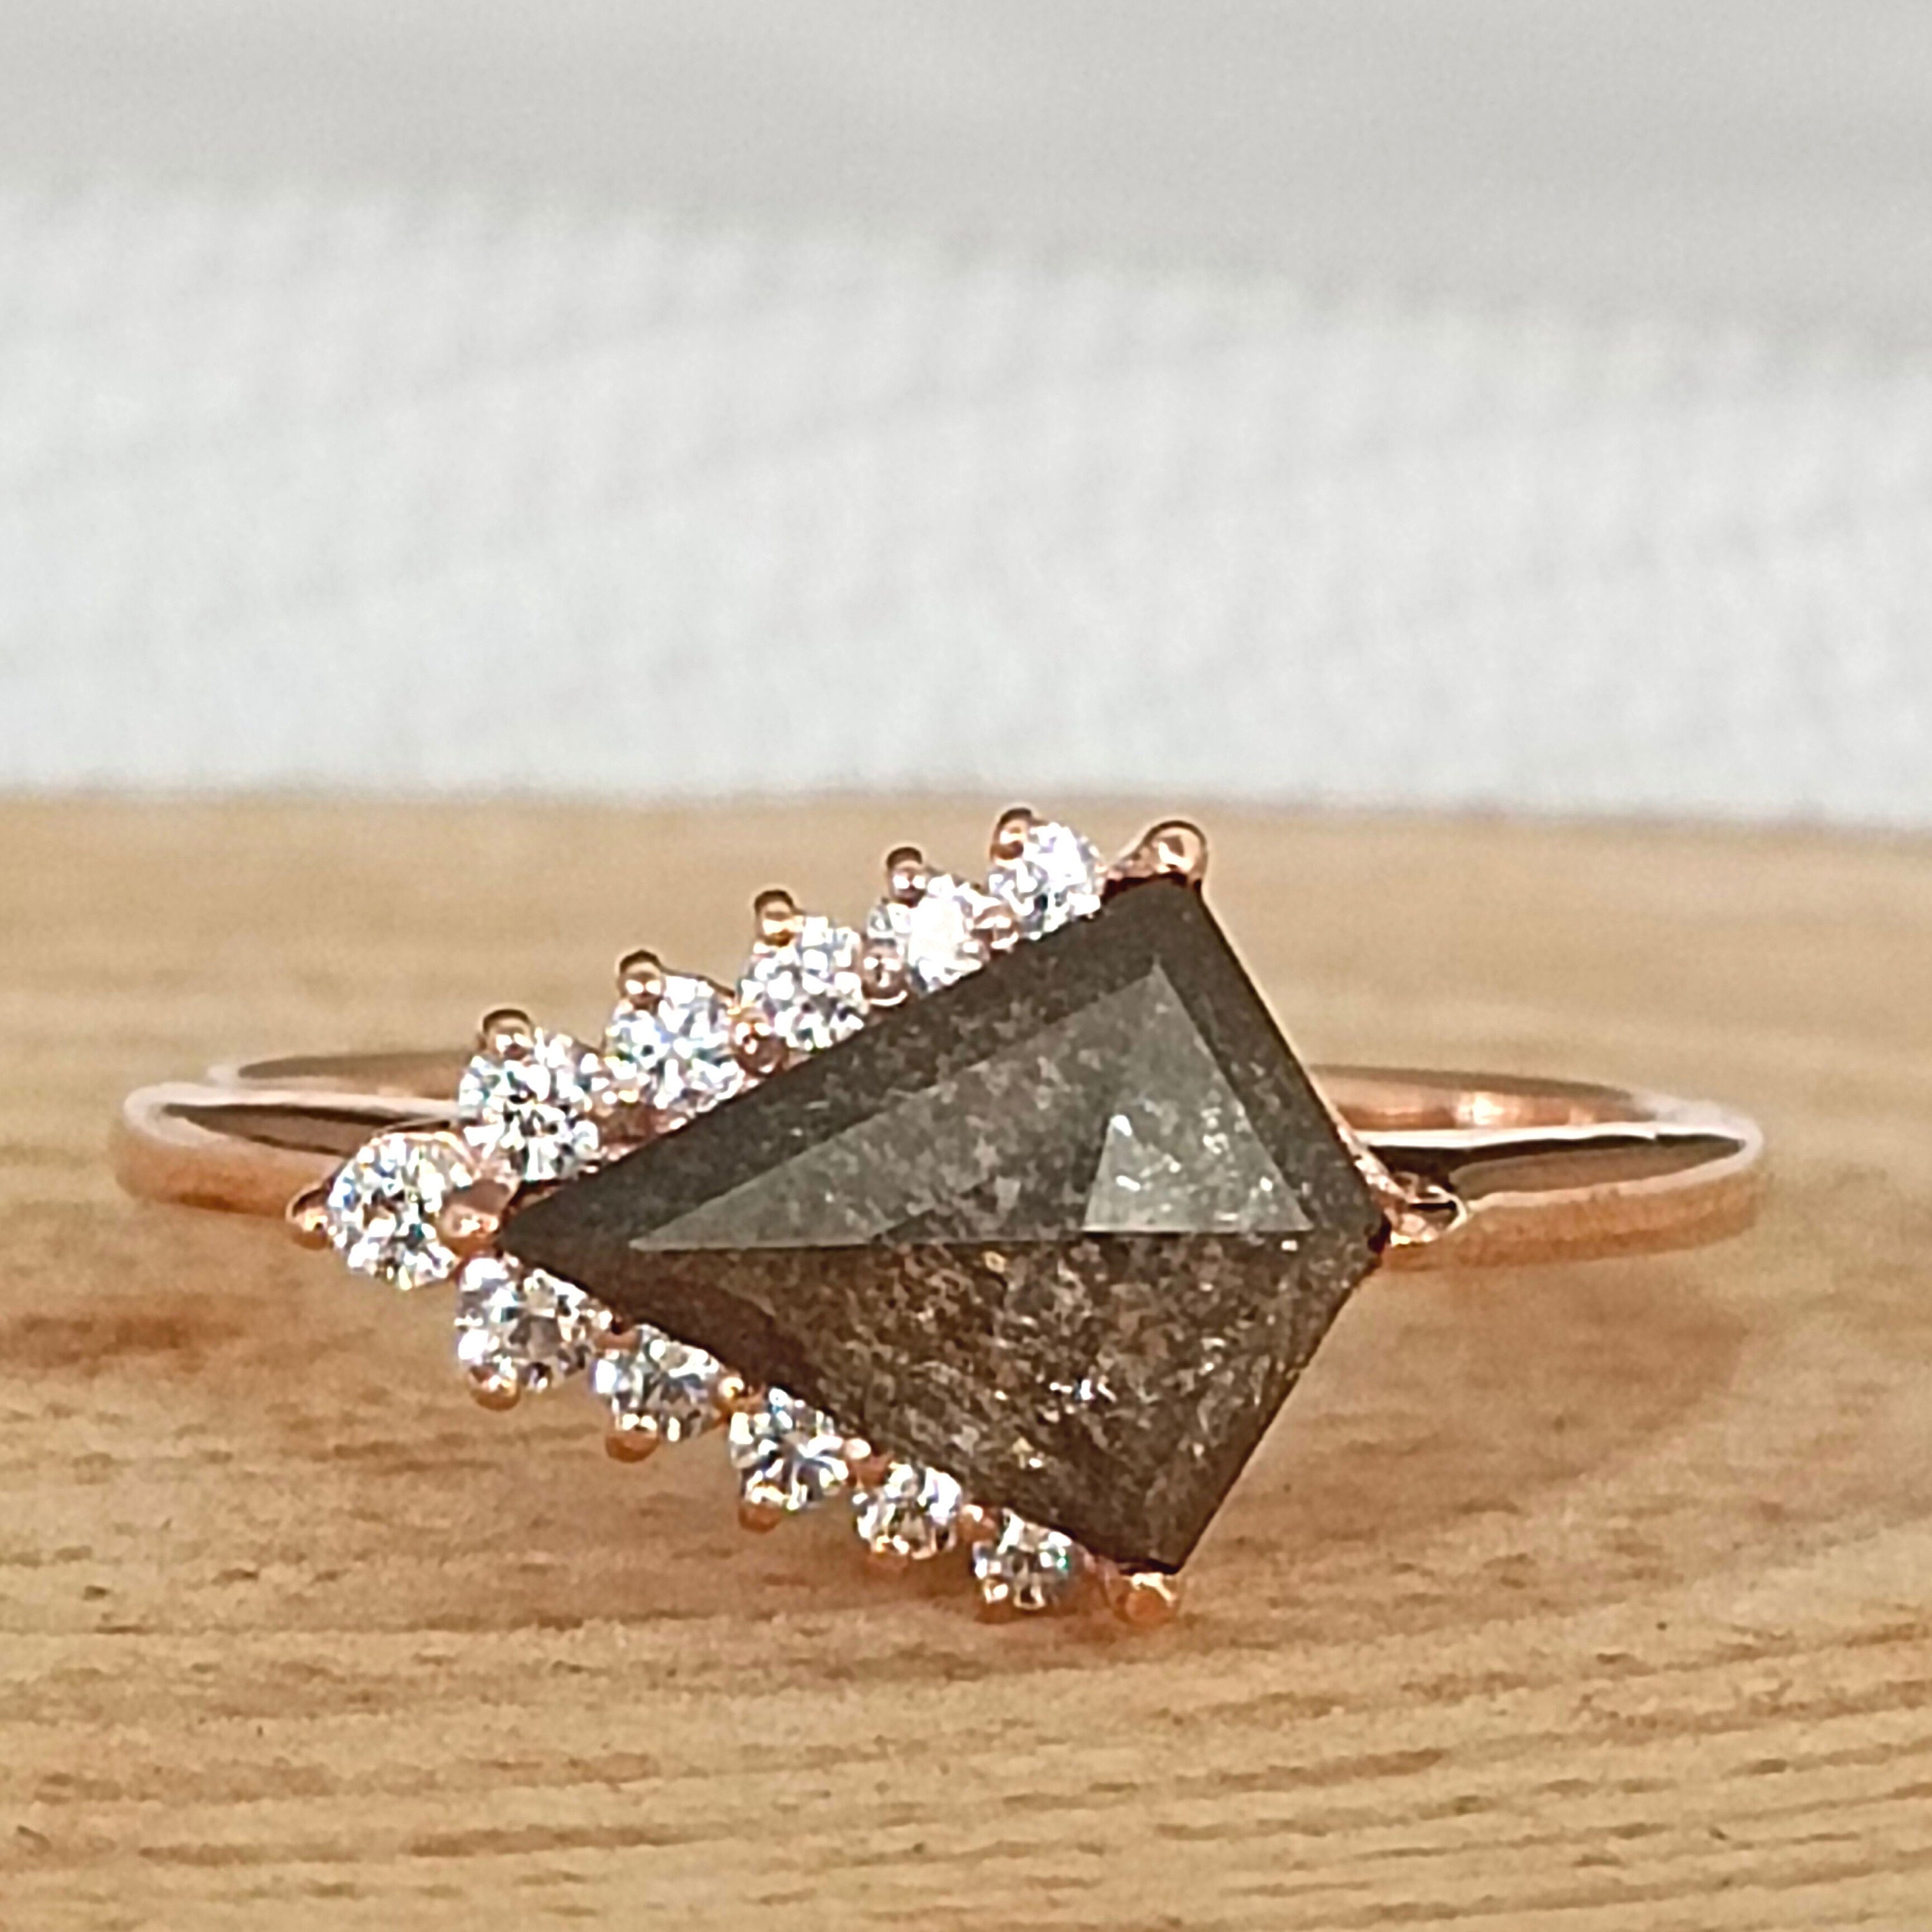 Salt and Pepper Diamond Ring | Kite Cut Ring | Unique Style Art Deco Ring |Engagement Ring | Handmade Ring |Wedding Ring |Statement Ringthumbnail